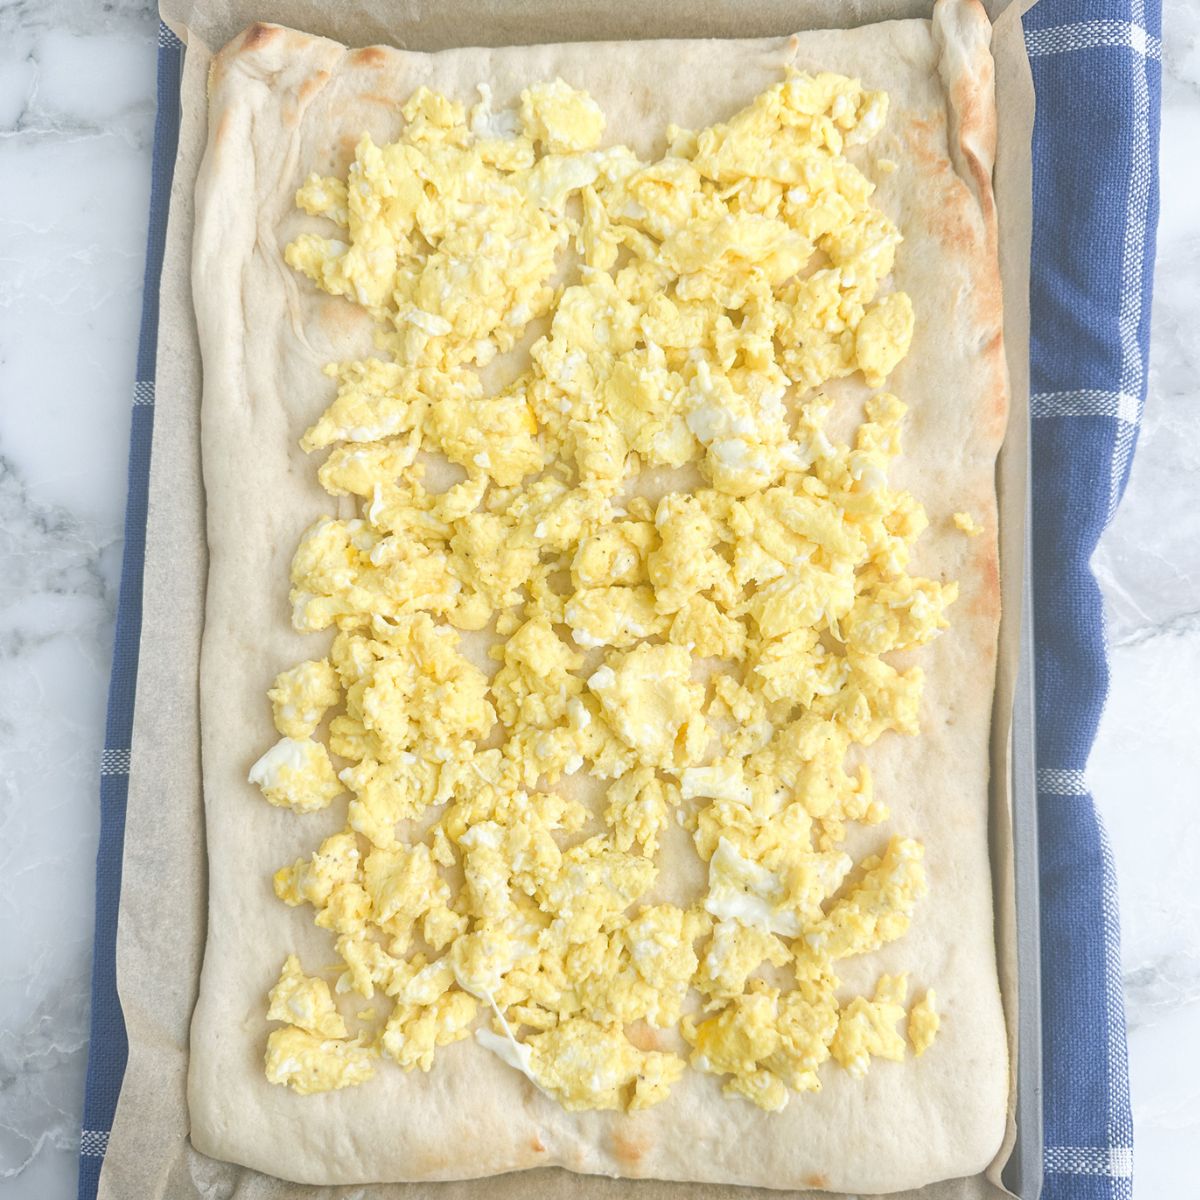 Pizza dough with scrambled eggs.